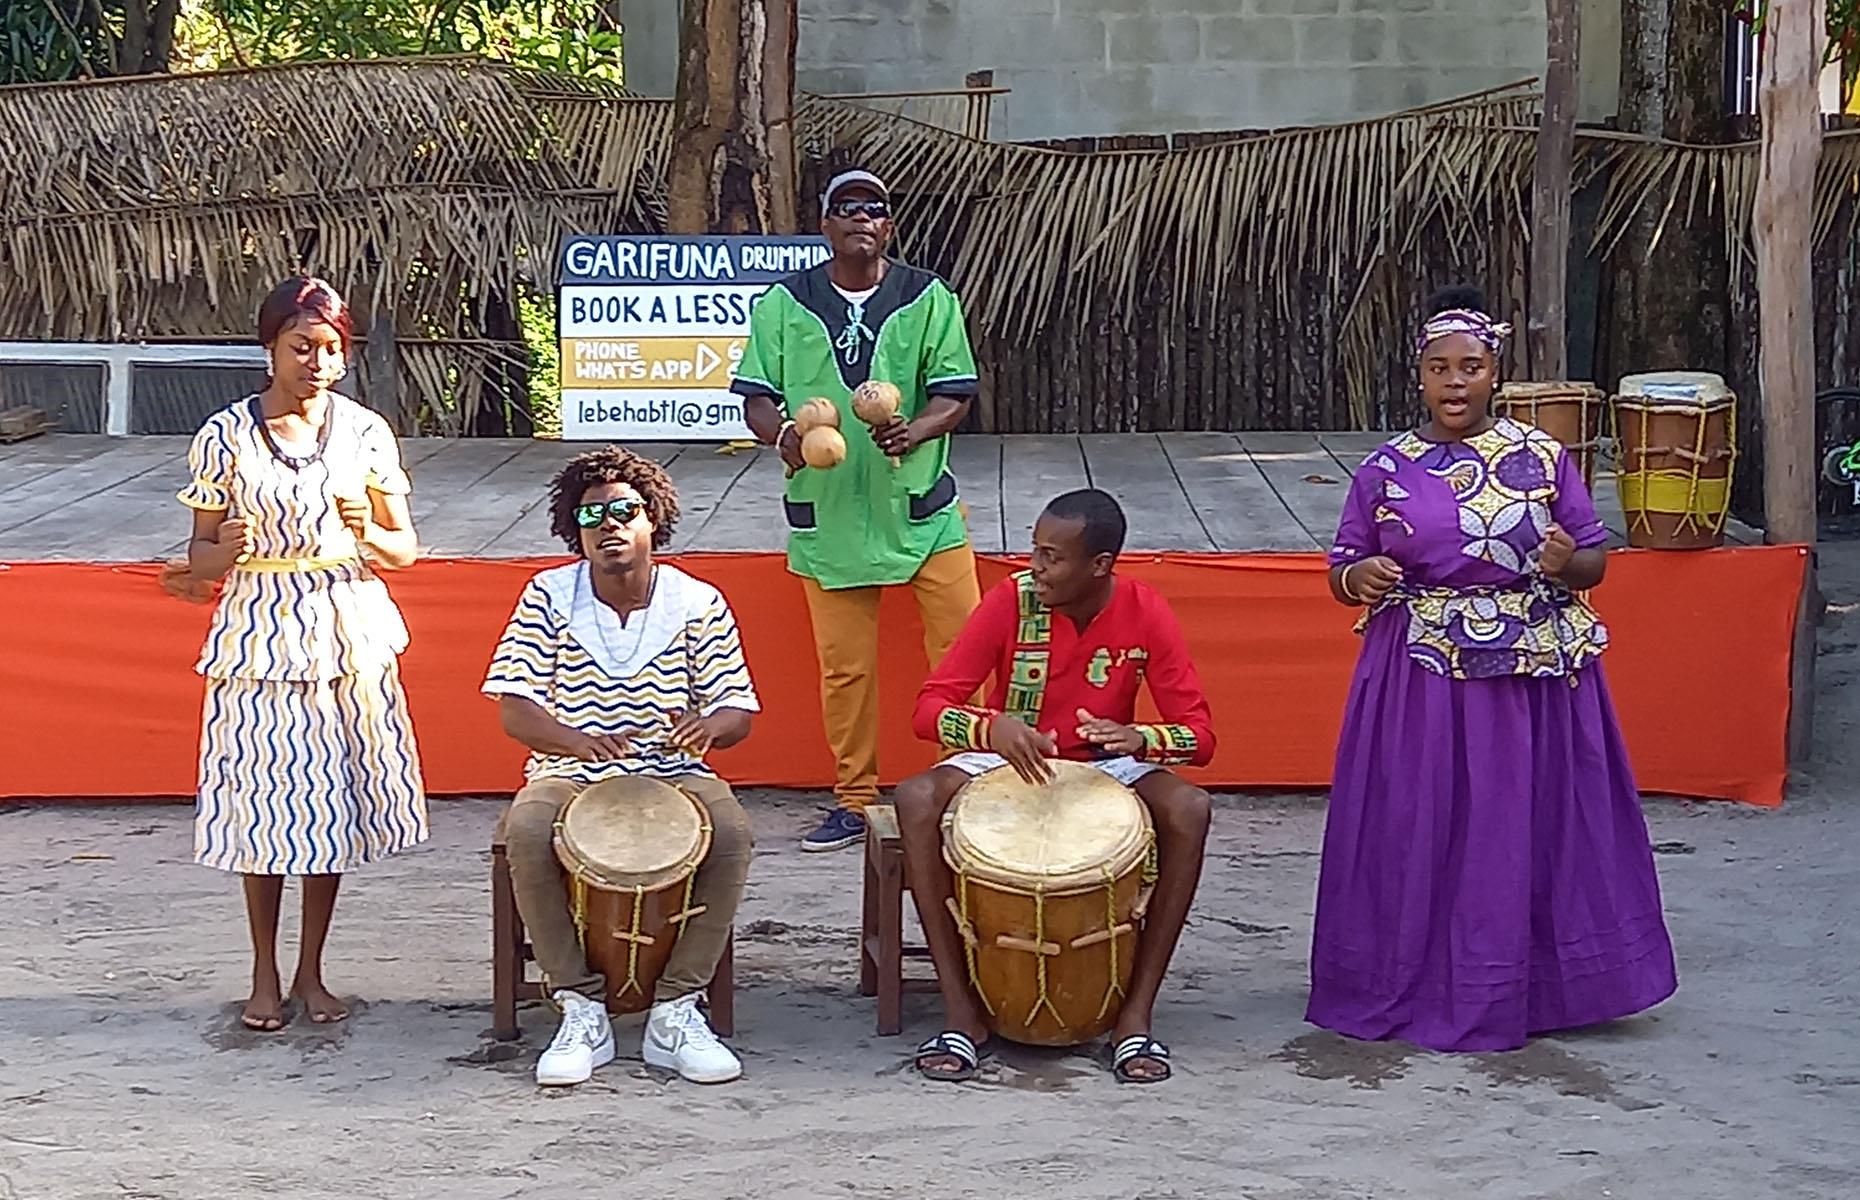 <p>Garifuna music is the unofficial sound of Belize – soulful songs in the Garifuna language underpinned by the complex rhythms of Garifuna drums. Various hotels and local tour operators offer Garifuna cultural experiences in Hopkins, where you'll learn how to tap out rudimentary beats on the primero and segunda drums, with the waves of the Caribbean serving up a soothing backing track. Step two is Garifuna dance: spiritual, improvisational motions that require near-constant foot movement. Finish your afternoon by learning to cook 'hudut,' a traditional coconut and seafood stew that would put most surrounding restaurants to shame.</p>